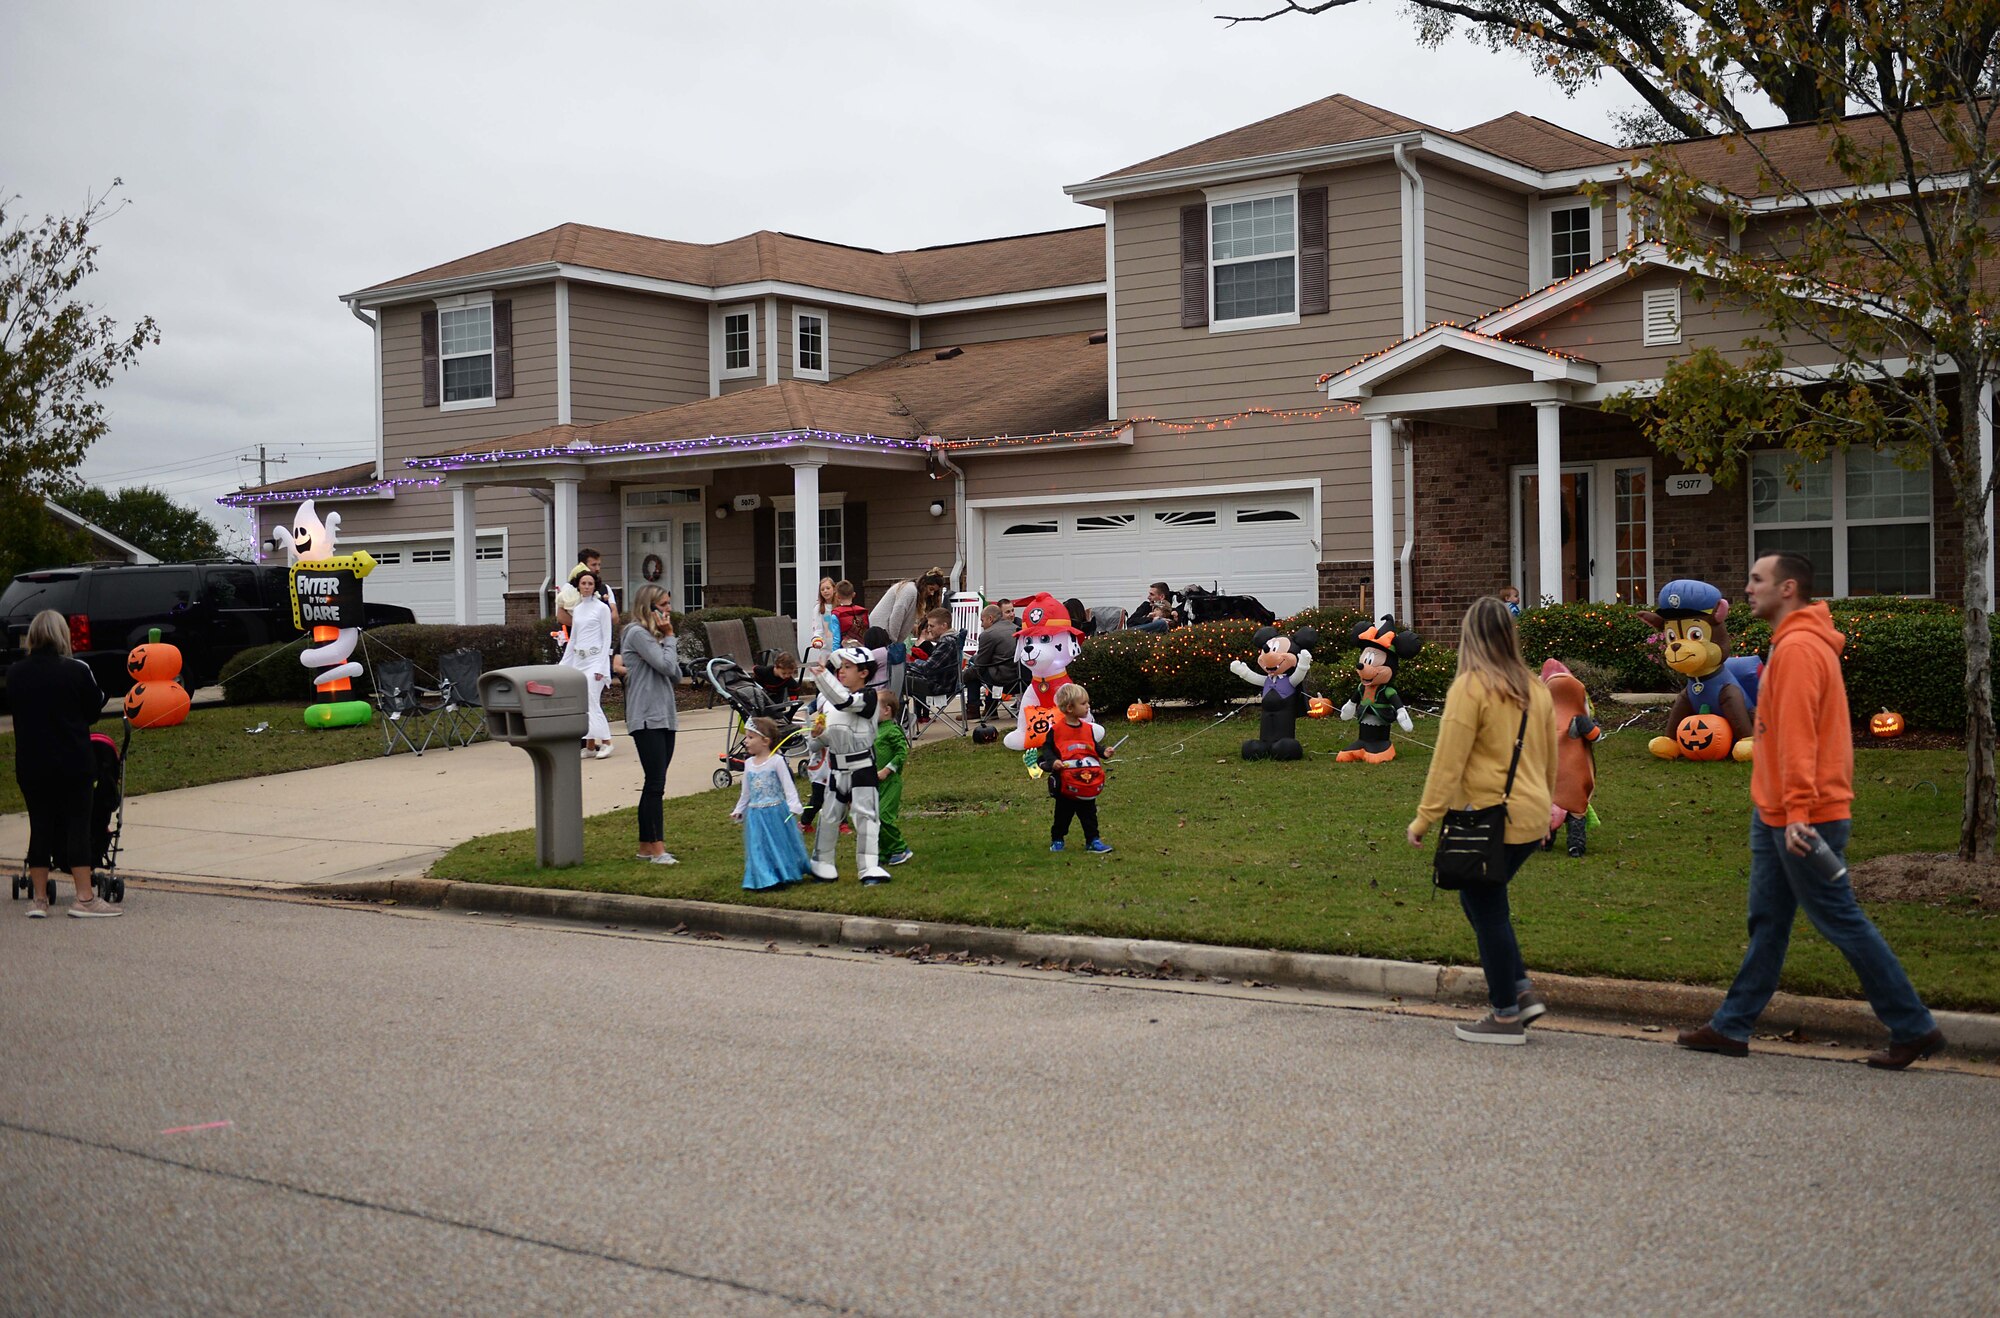 Children, families and friends trick or treat through neighborhoods Oct. 27, 2019, on Columbus Air Force Base, Miss. Halloween originated from an ancient Celtic end-of-harvest festival of Samhain, typically marking the end of the harvest season and the beginning of the winter season. (U.S. Air Force photo by Airman 1st Class Hannah Bean)